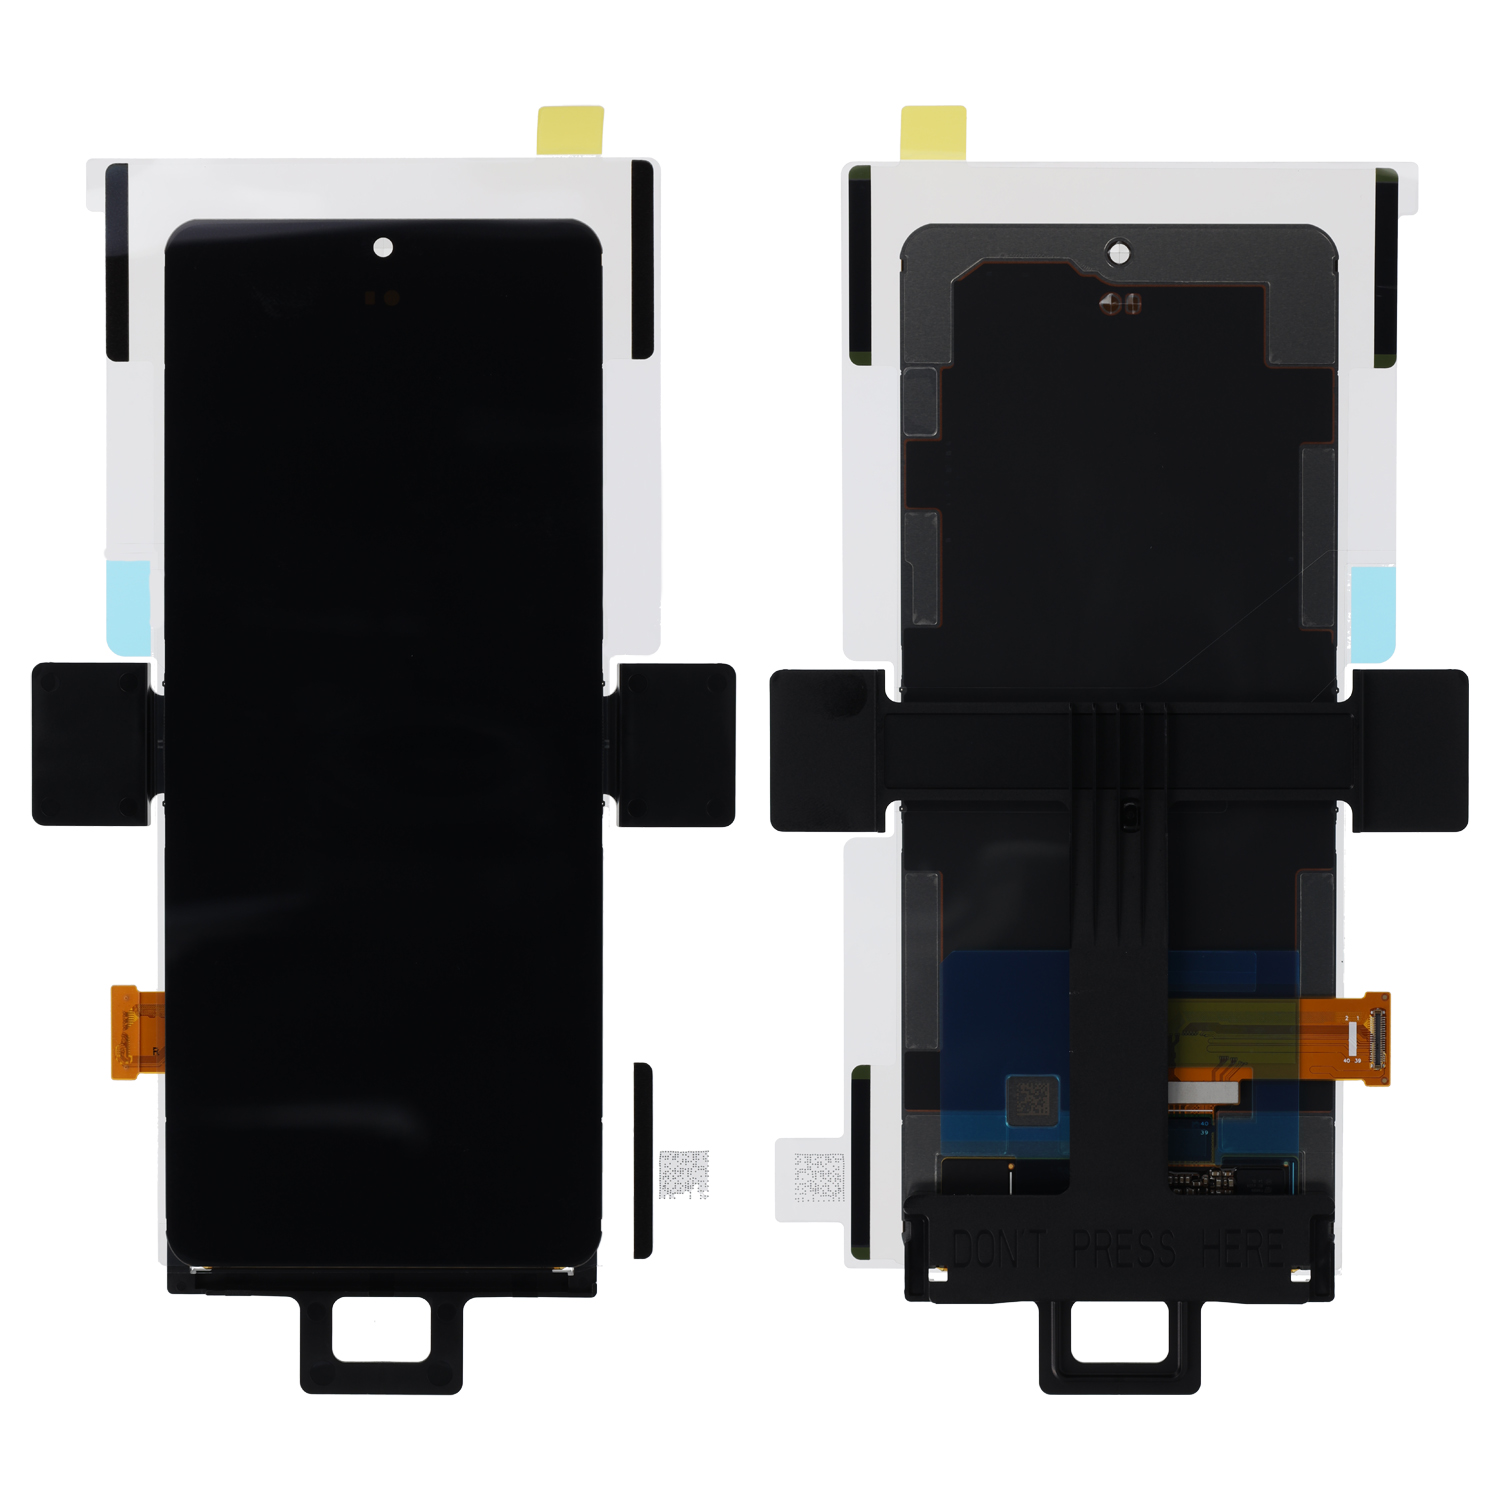 Samsung Galaxy Z Flip (F700) LCD Display (without display)